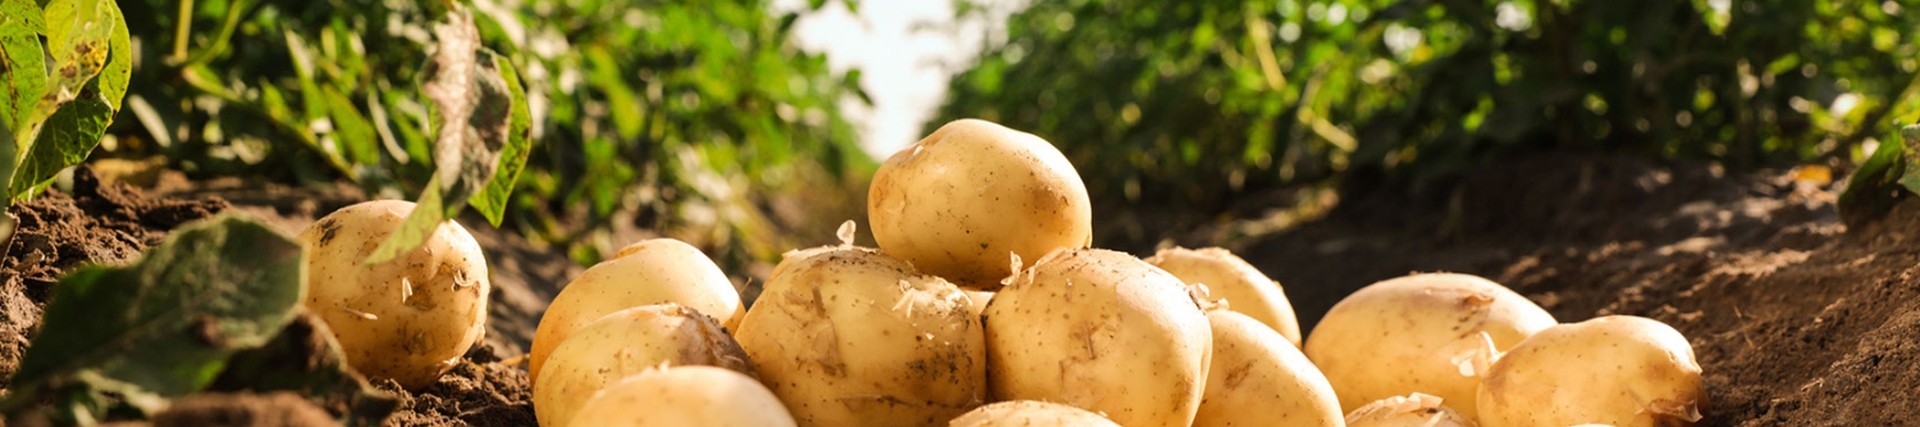 Image shows a stack of potatoes in the middle of a row of green leafy potato plants